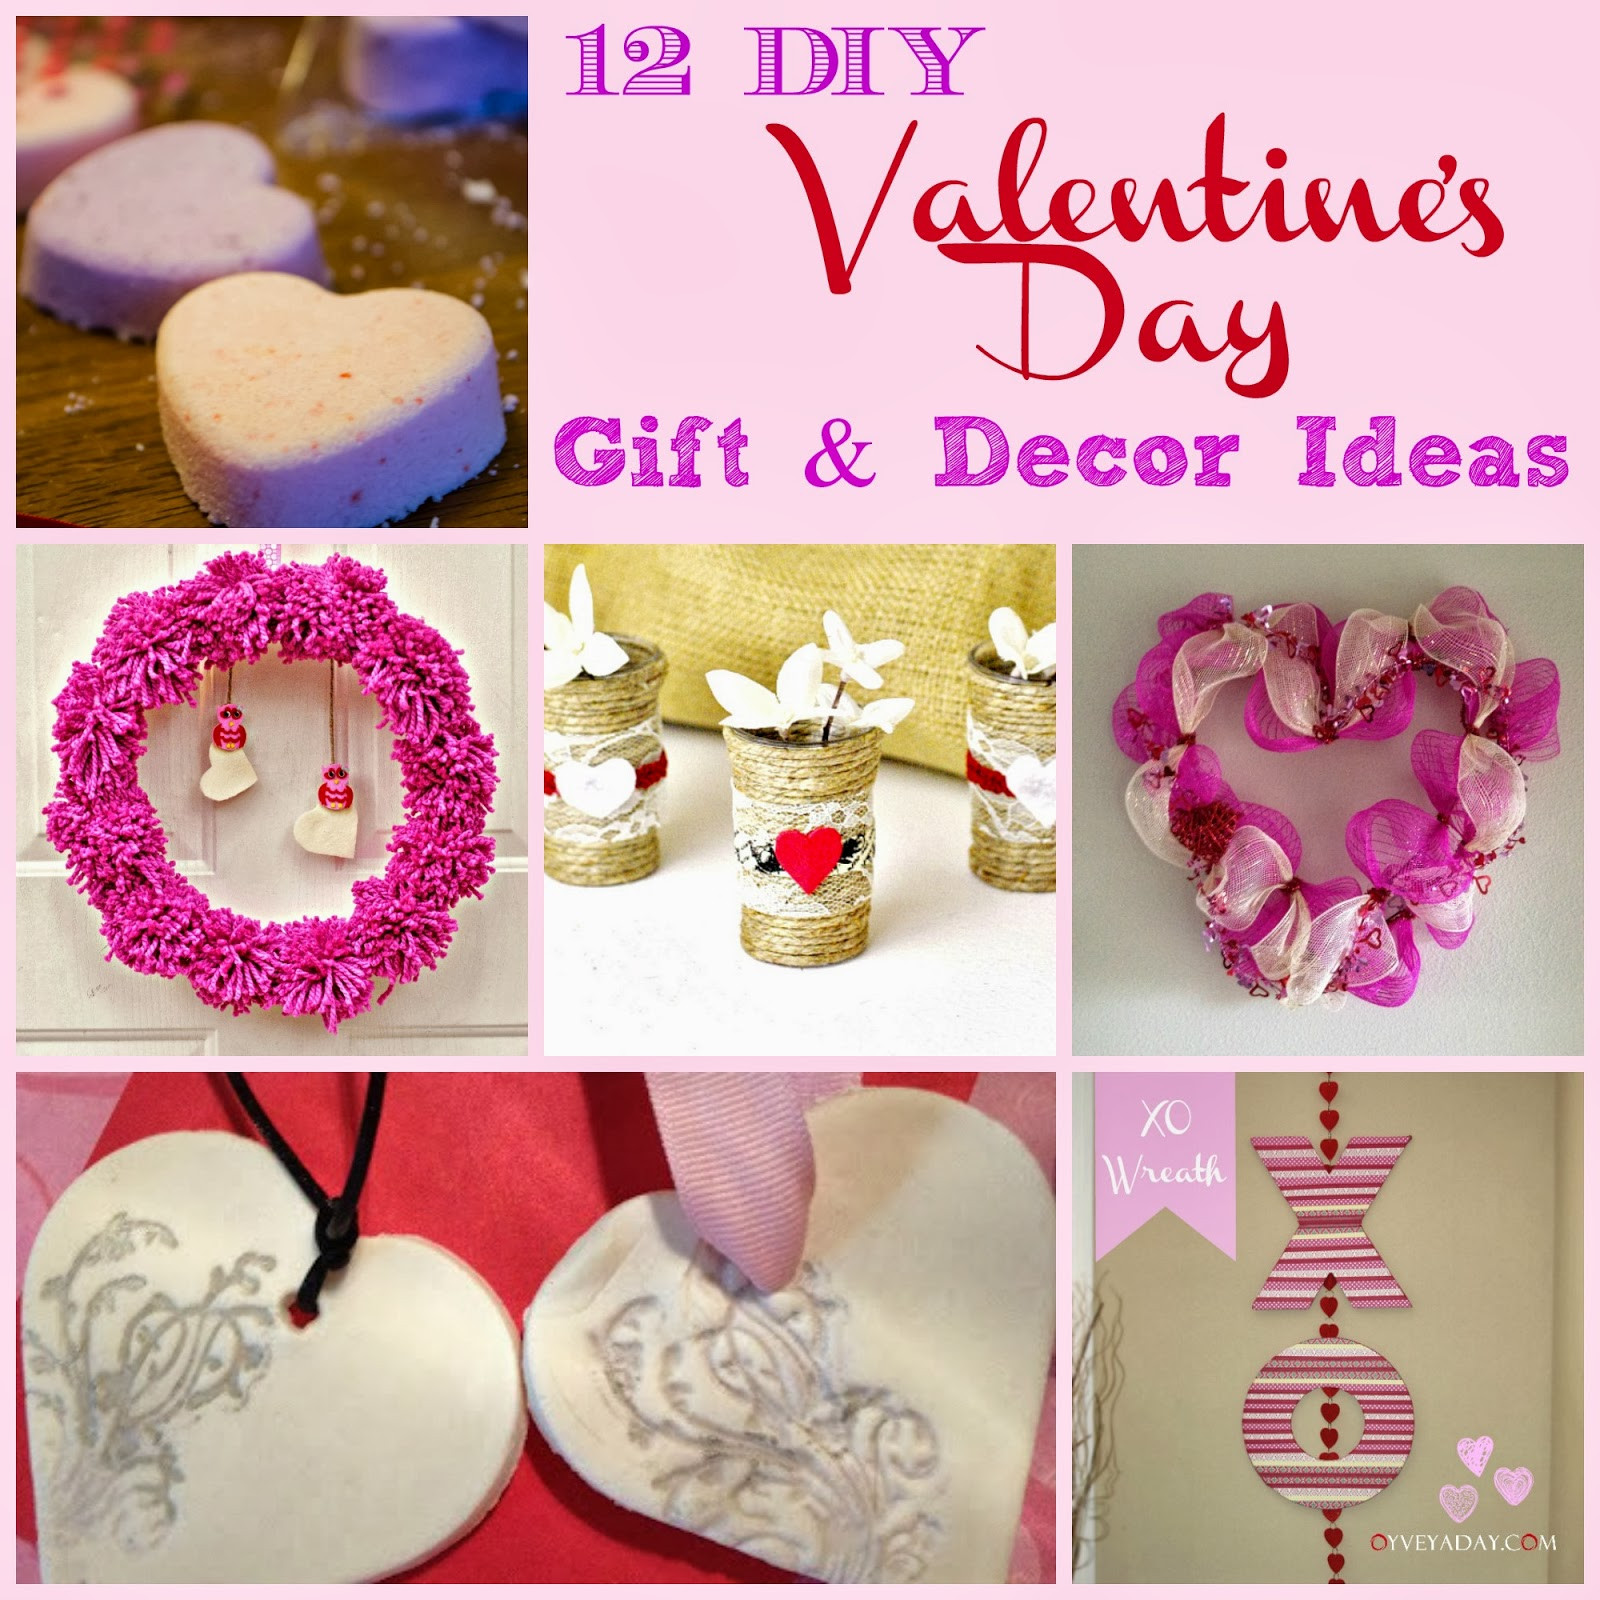 Best ideas about Diy Valentine Gift Ideas
. Save or Pin 12 DIY Valentine s Day Gift & Decor Ideas Outnumbered 3 to 1 Now.